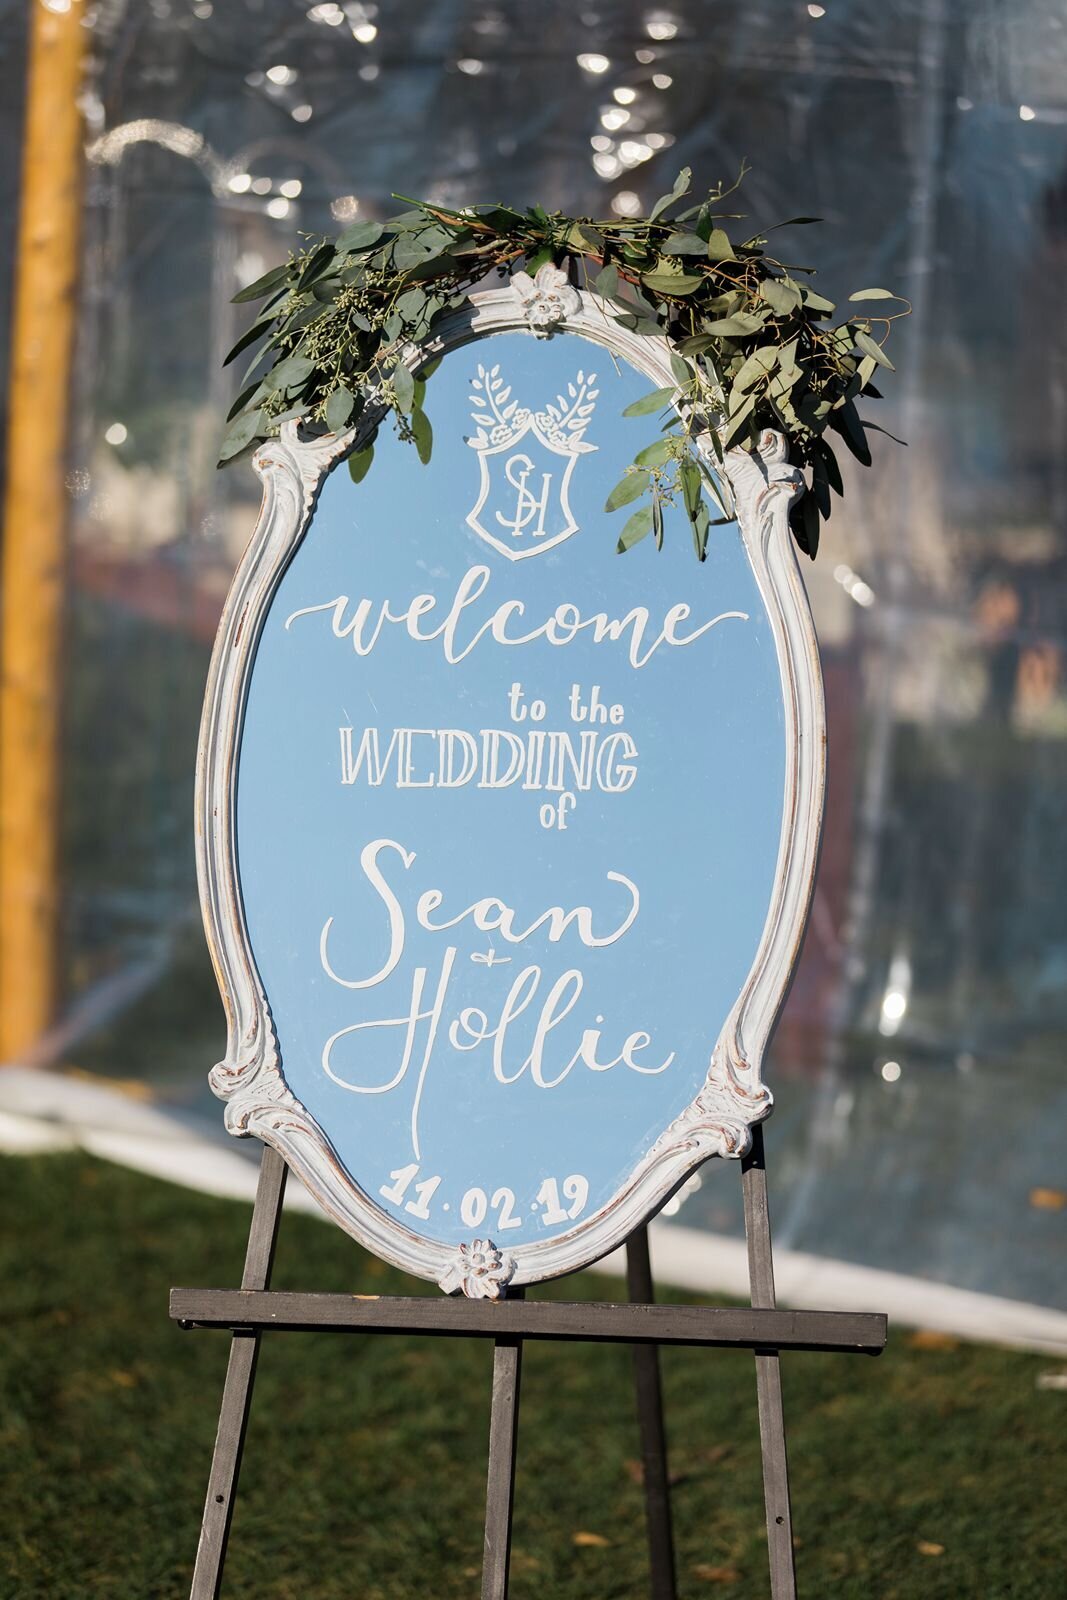 leila-james-events-newport-ri-wedding-planning-luxury-events-castle-hill-inn-hollie-and-sean-molly-lo-photography-13